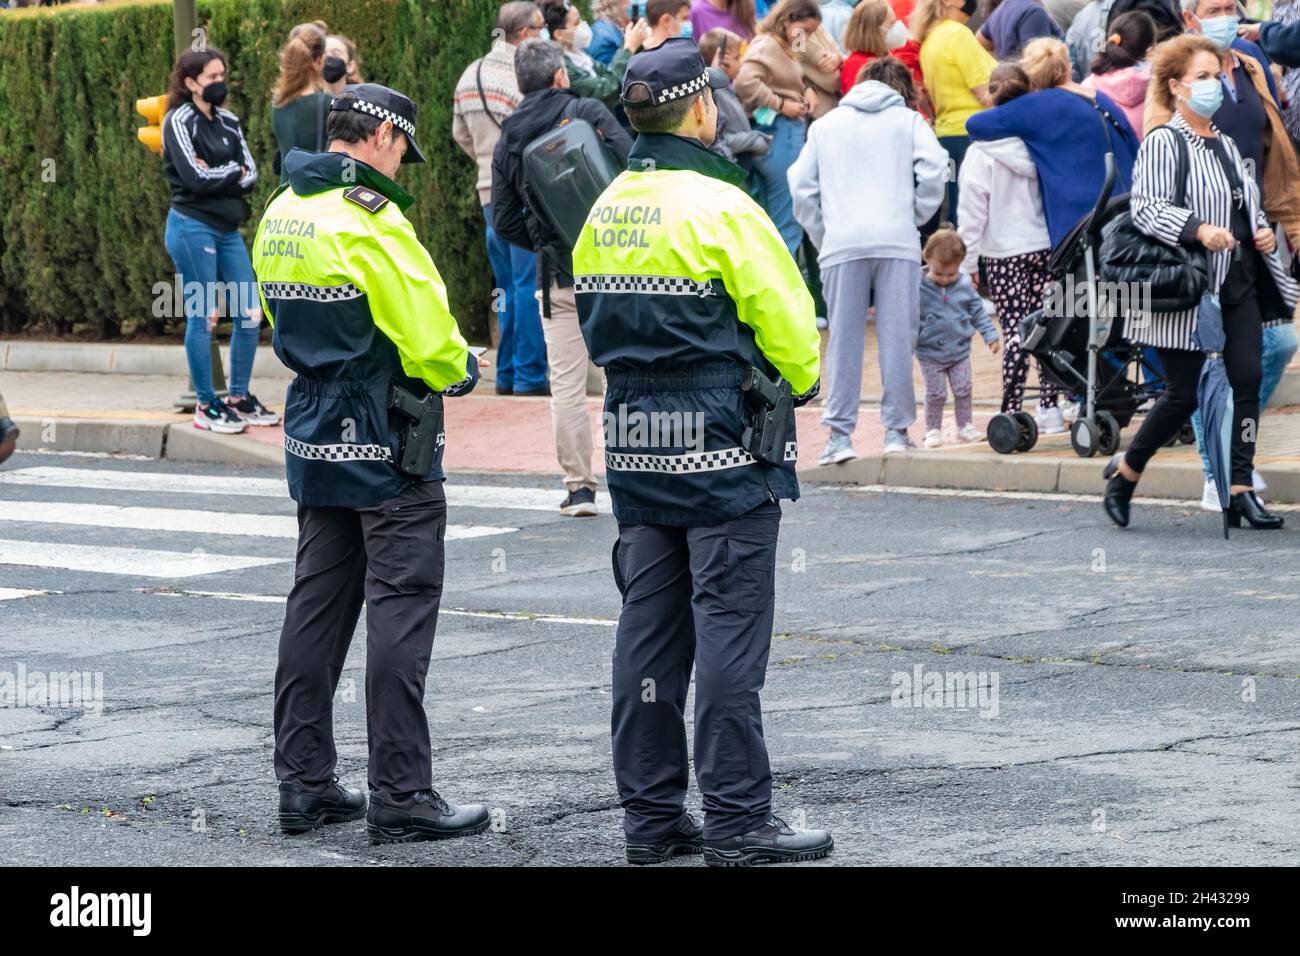 Huelva, Spain - October 30, 2021:  Back view of Spanish police  with 'Local Police' logo emblem on uniform maintain public order in the streets of Hue Stock Photo